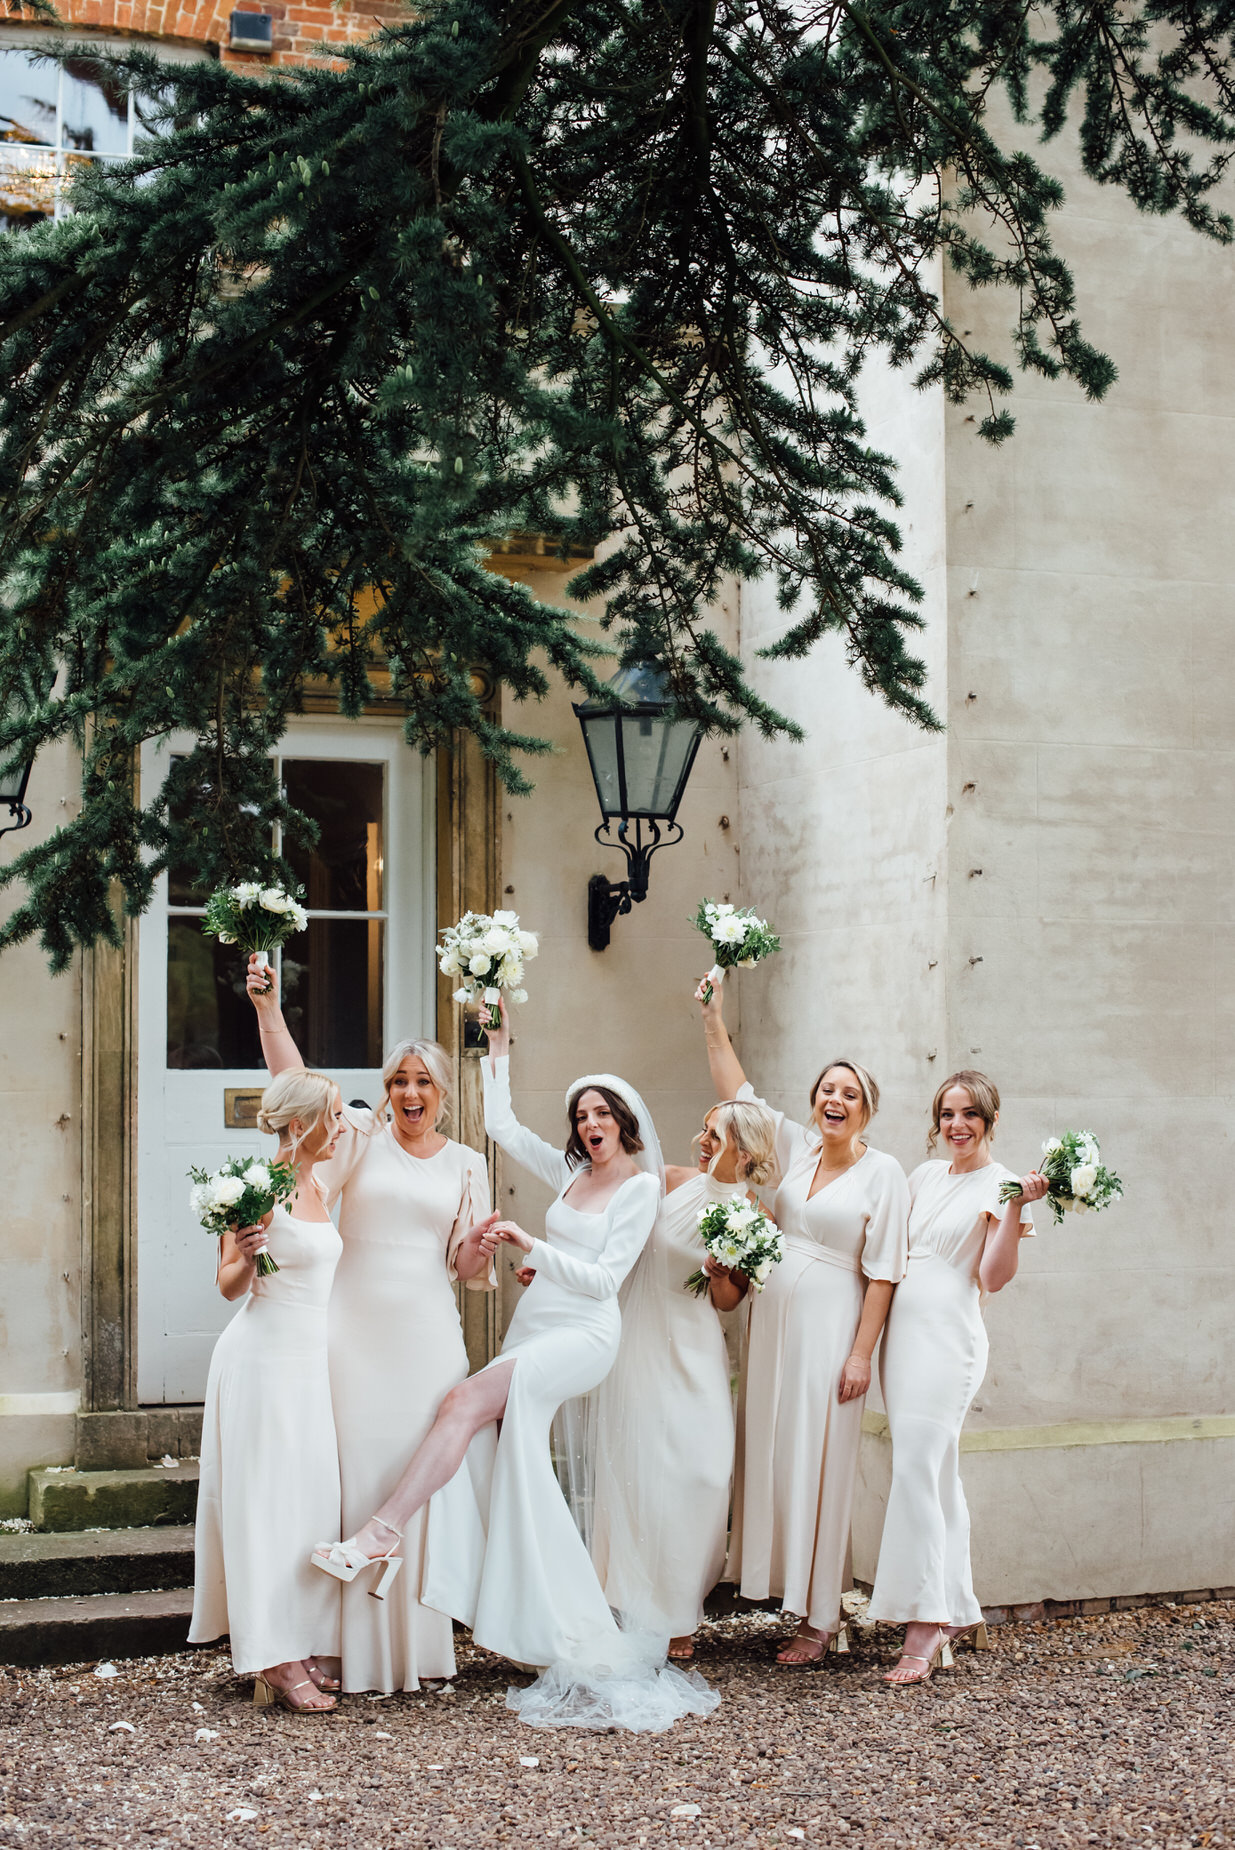 group shots, Aswarby bride, authentic wedding photography, Aswarby Rectory Wedding, michelle wood photographer